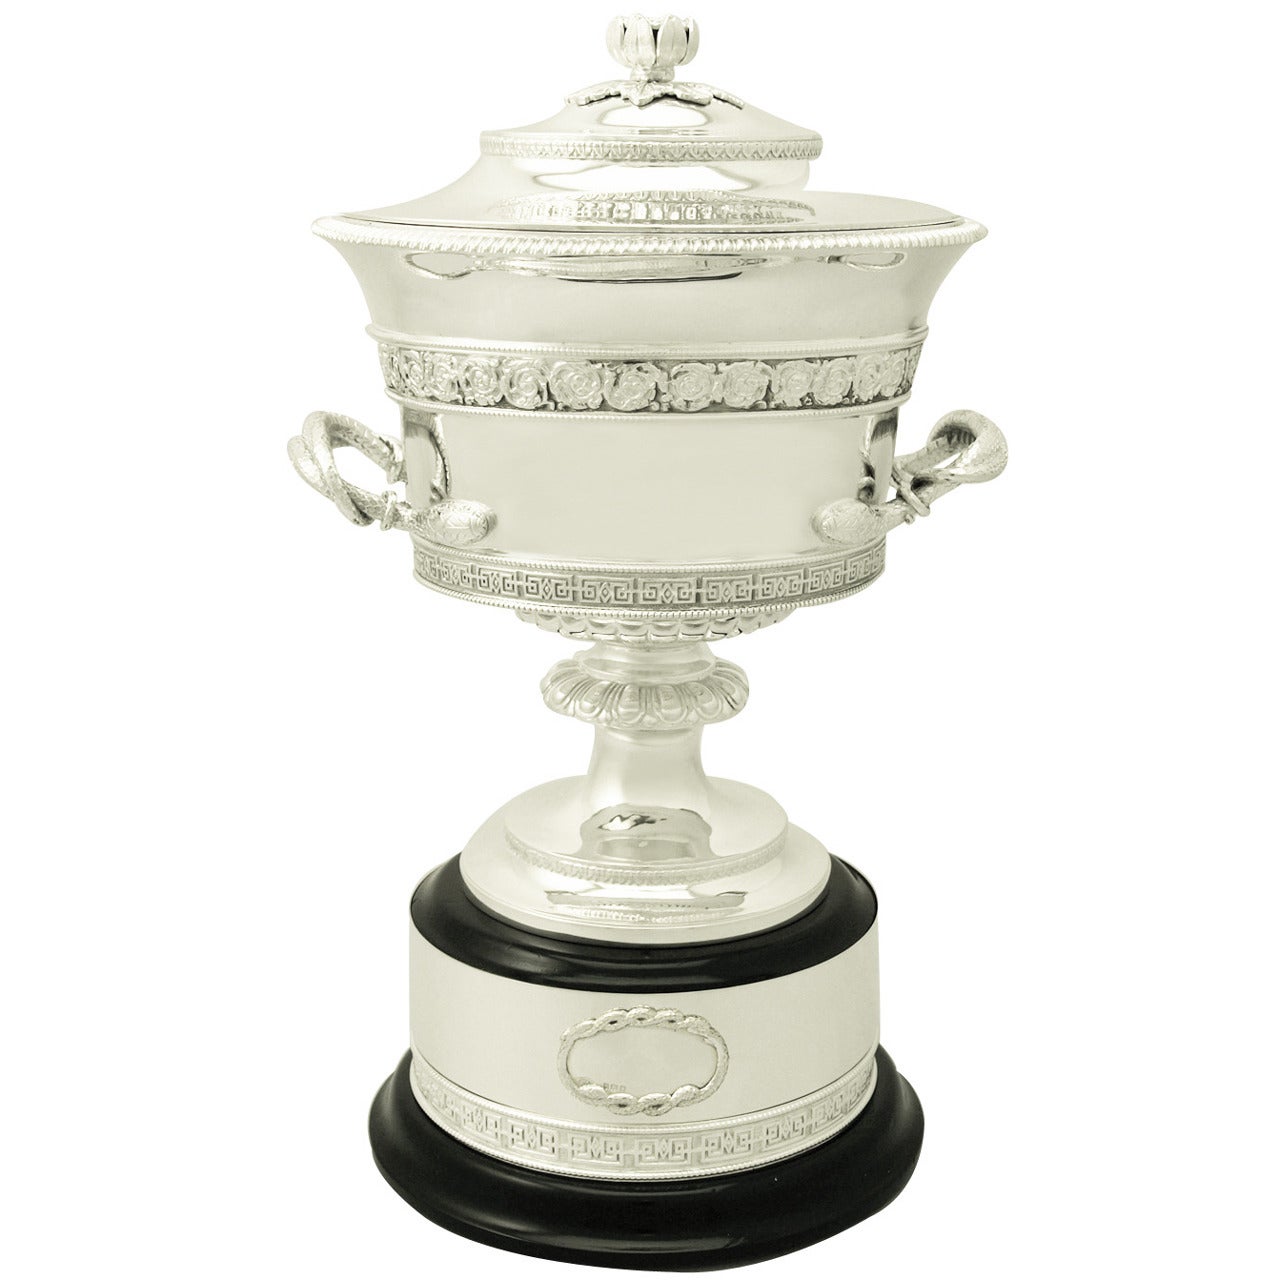 An exceptional, fine and impressive antique George V English sterling silver presentation cup with cover and original ebonised plinth; an addition to our presentation silverware collection.

This exceptional antique silver presentation cup has a